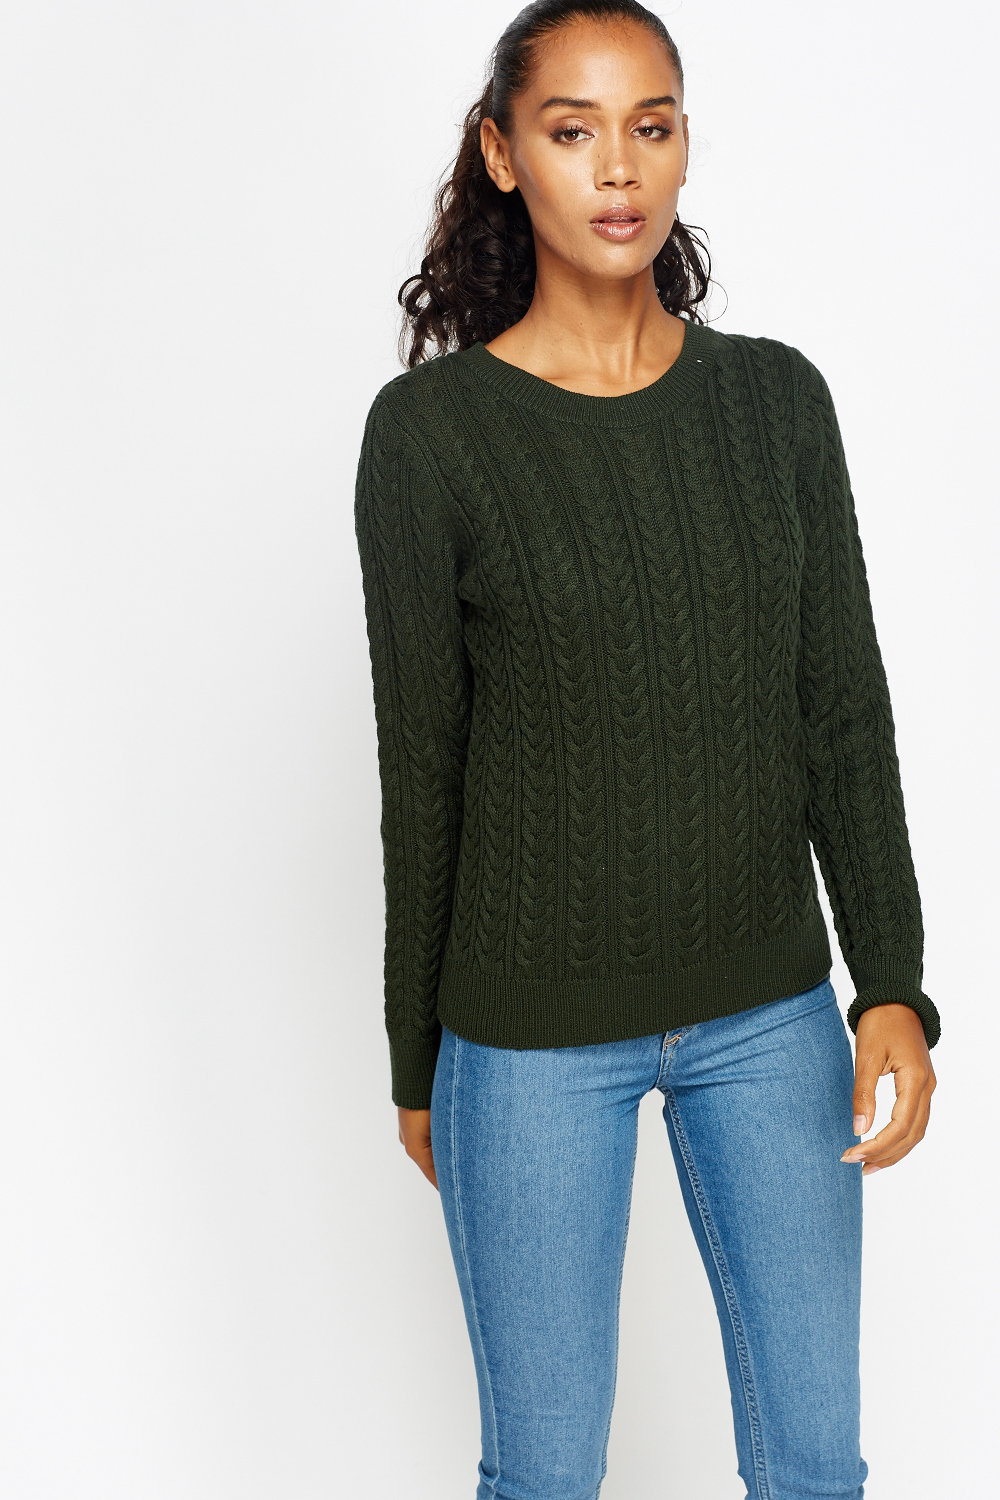 Knitted Casual Jumper - Just $7